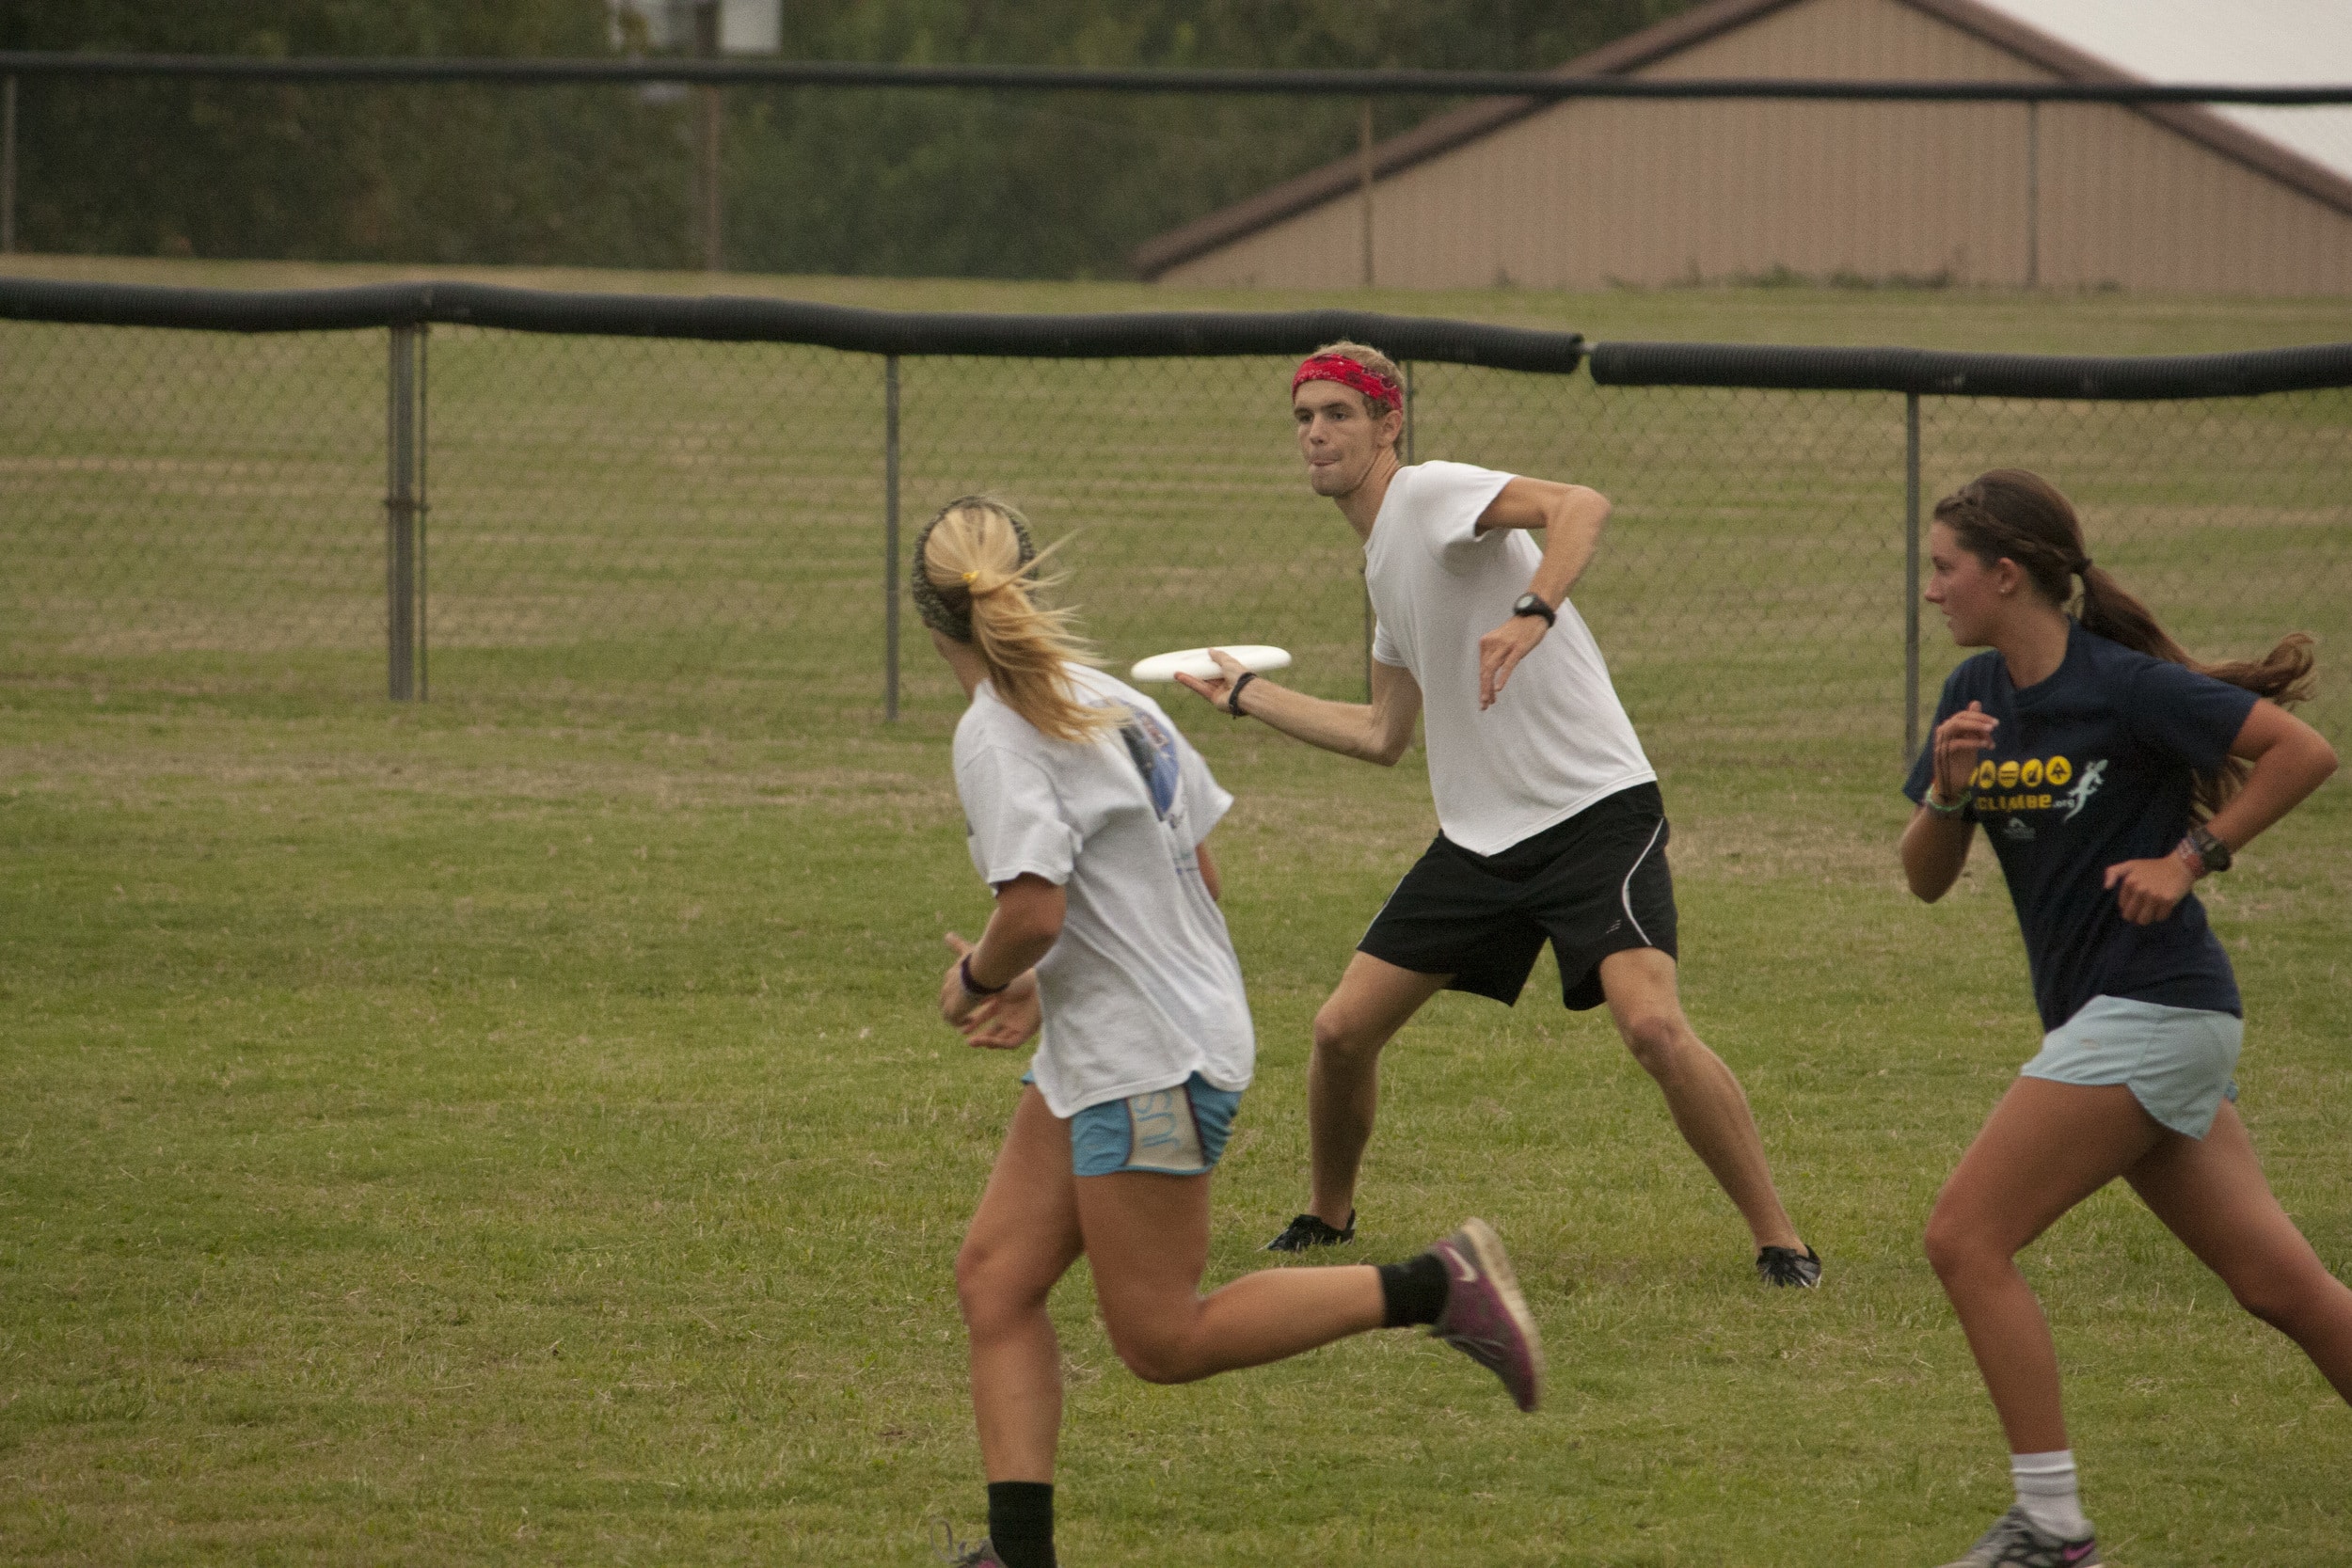 Tanner Furr, sophomore, intensely looks downfield to toss the Frisbee &nbsp;to a fellow teammate on one of NGU's fields.